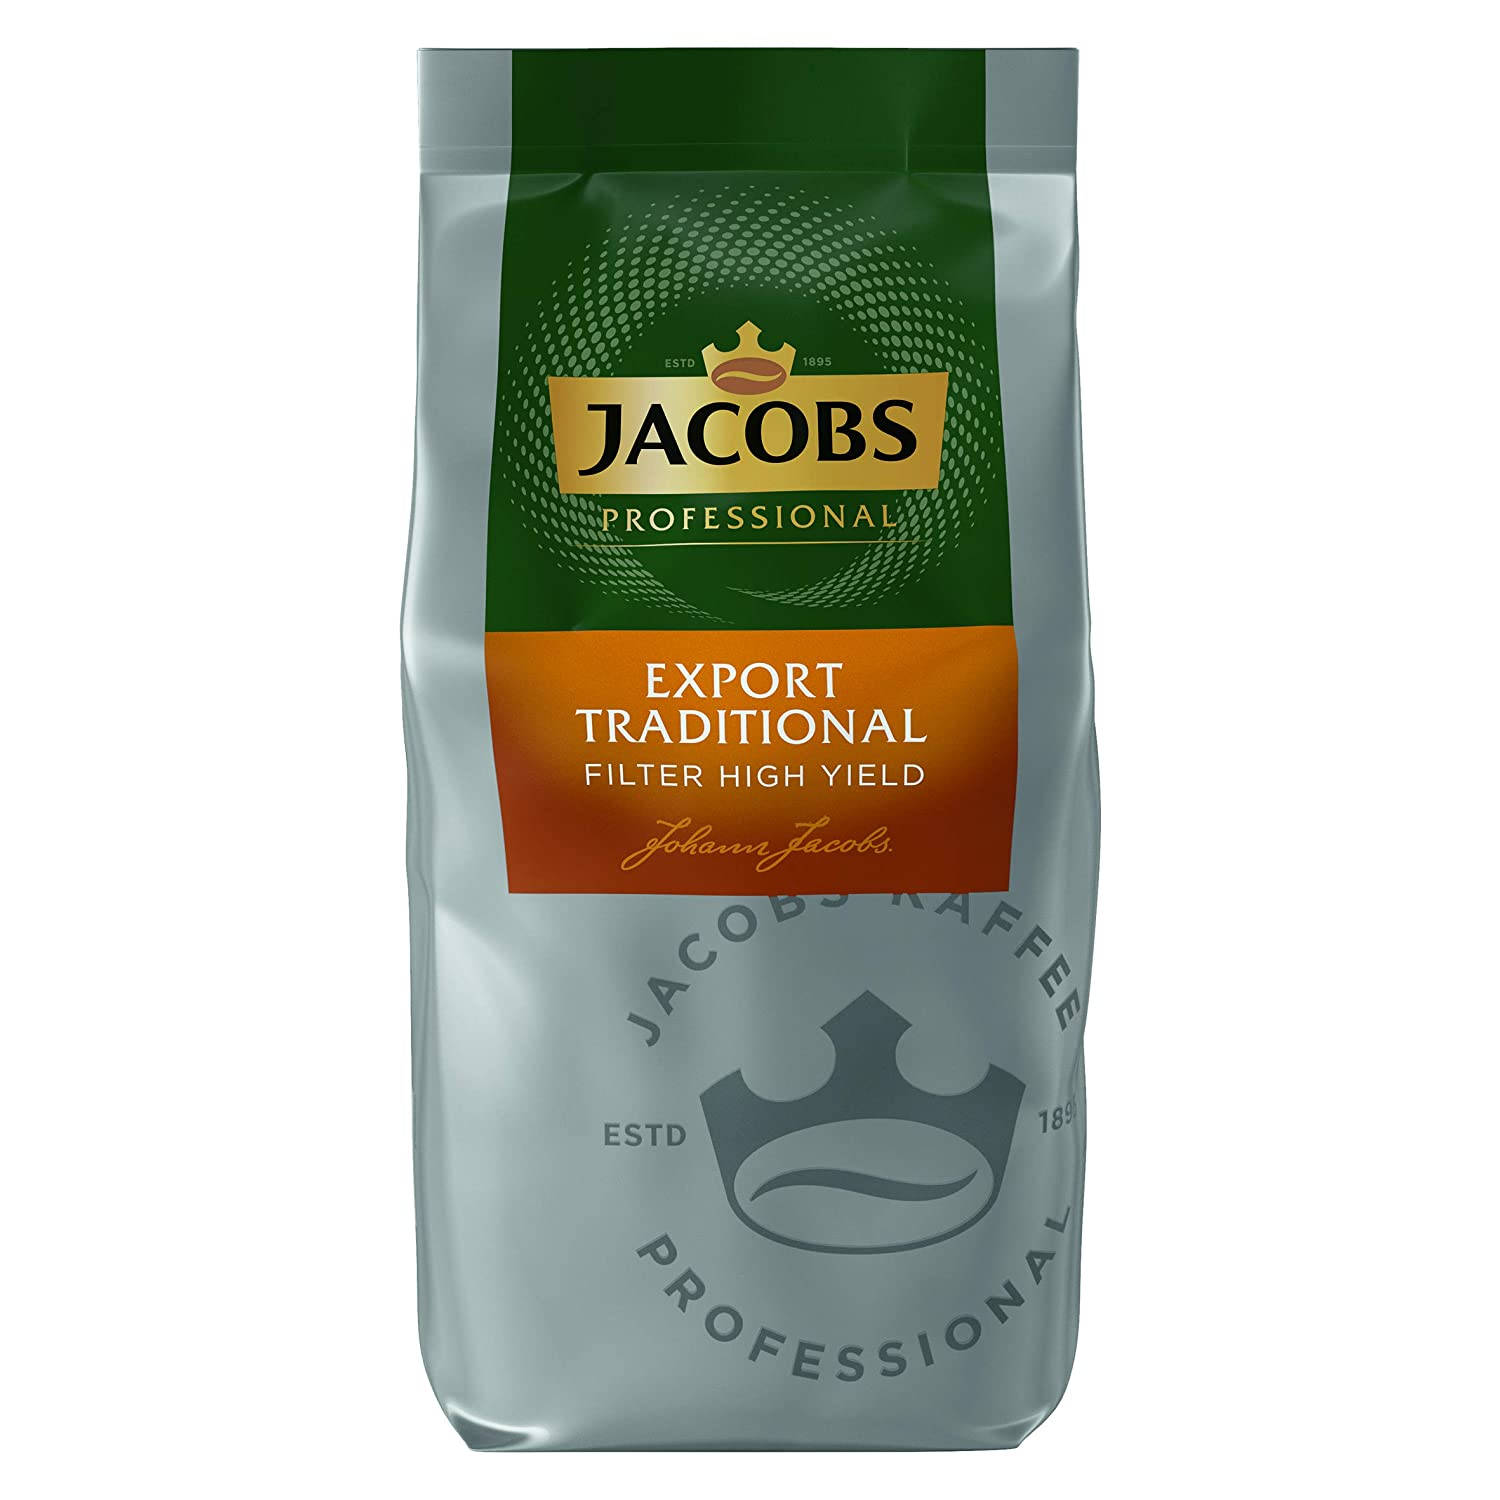 JACOBS Professional Export Traditional High 2x800g Filterkaffee (Filtermaschinen, Yield French Press)